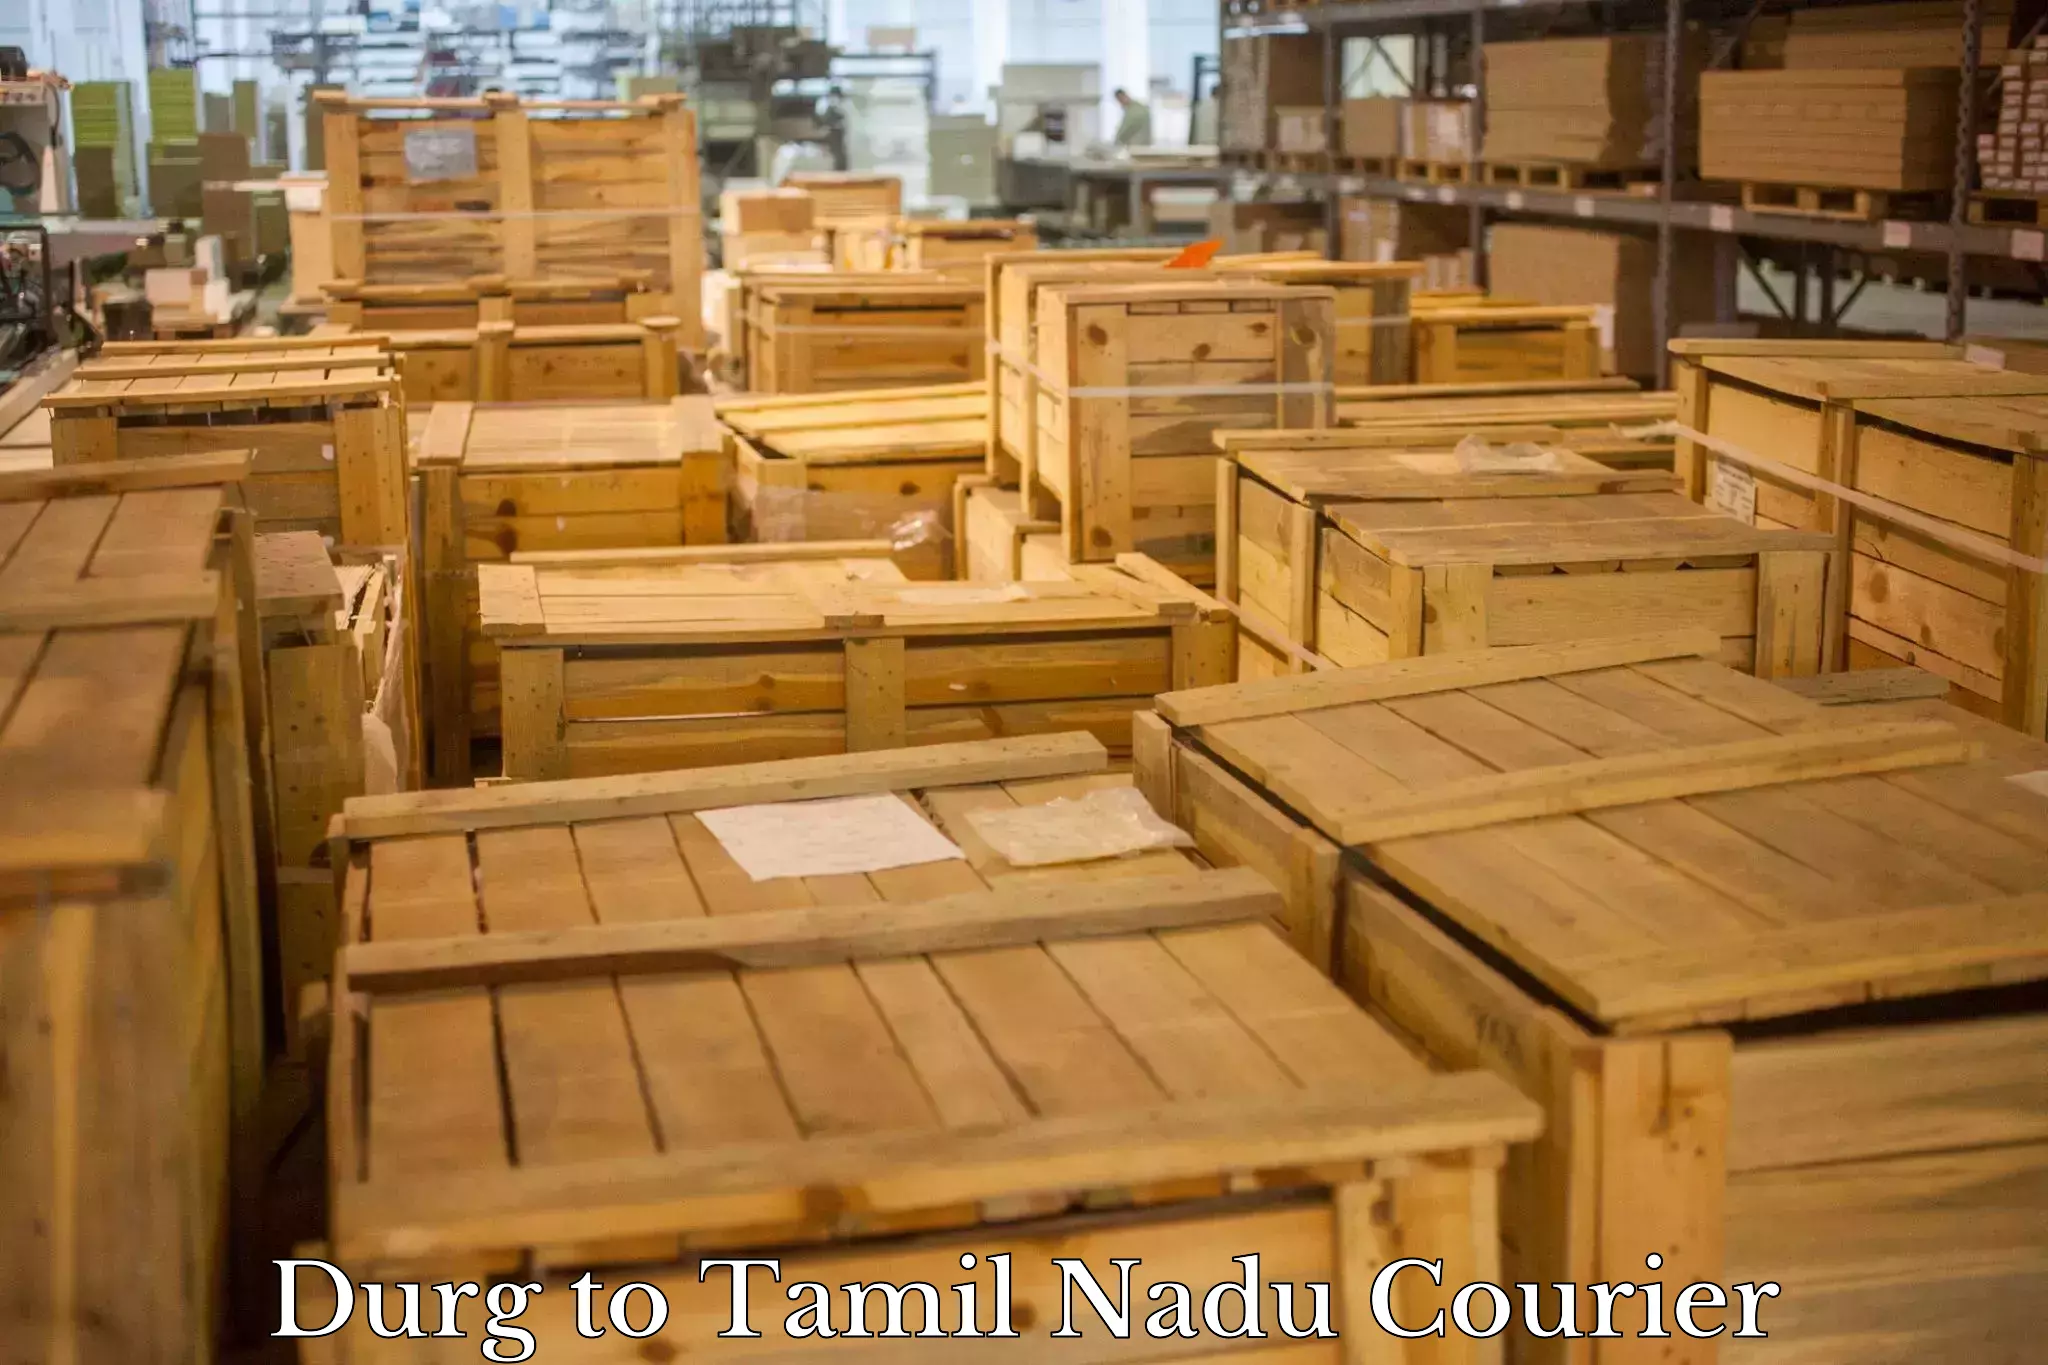 Global courier networks Durg to Tamil Nadu